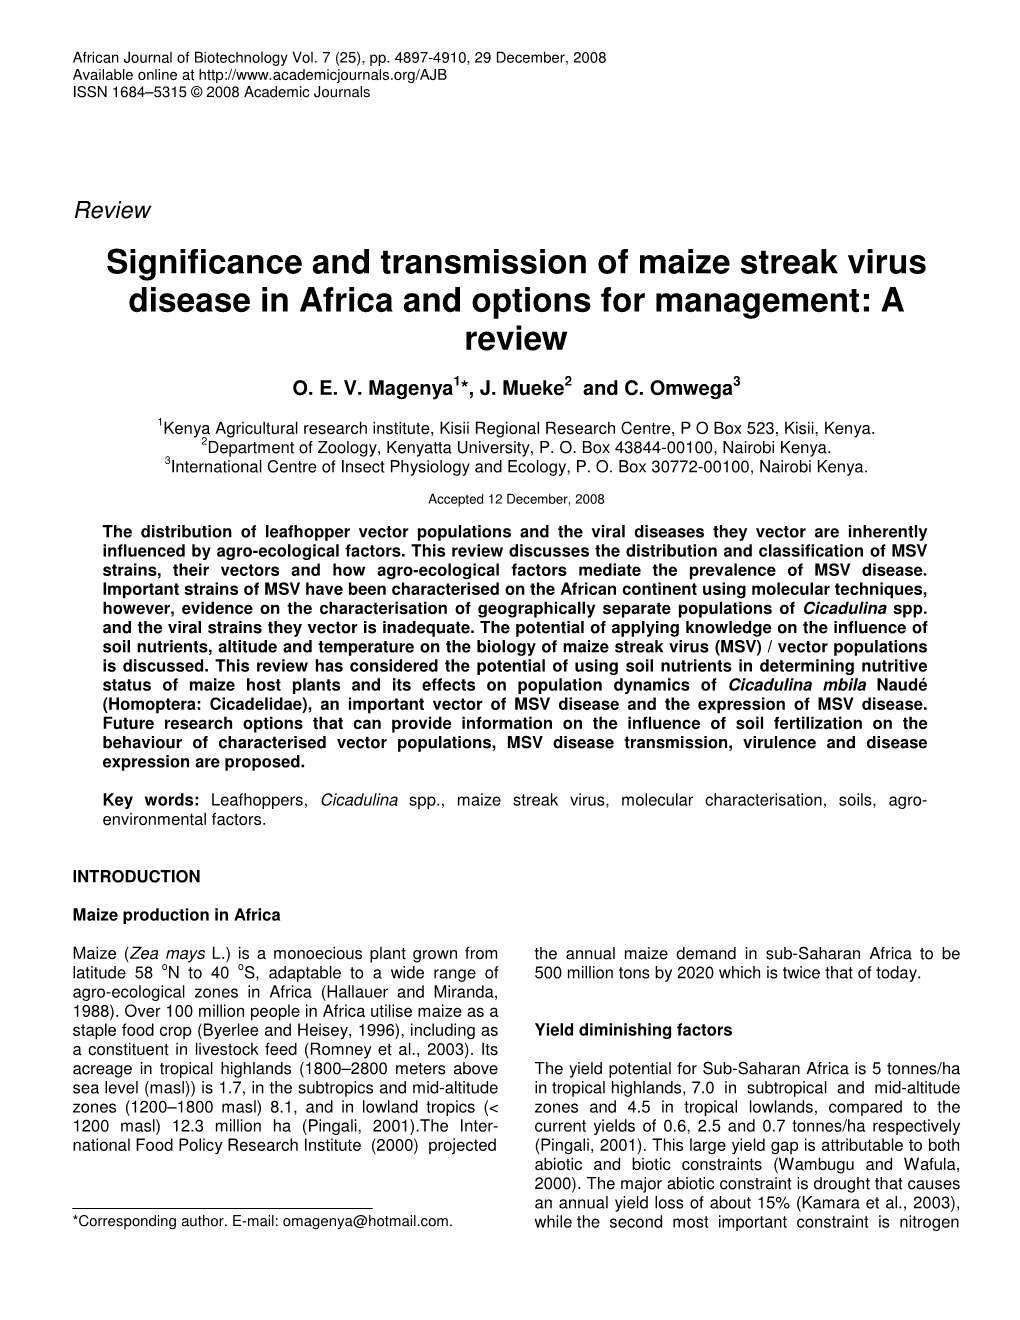 Significance and Transmission of Maize Streak Virus Disease in Africa and Options for Management: a Review